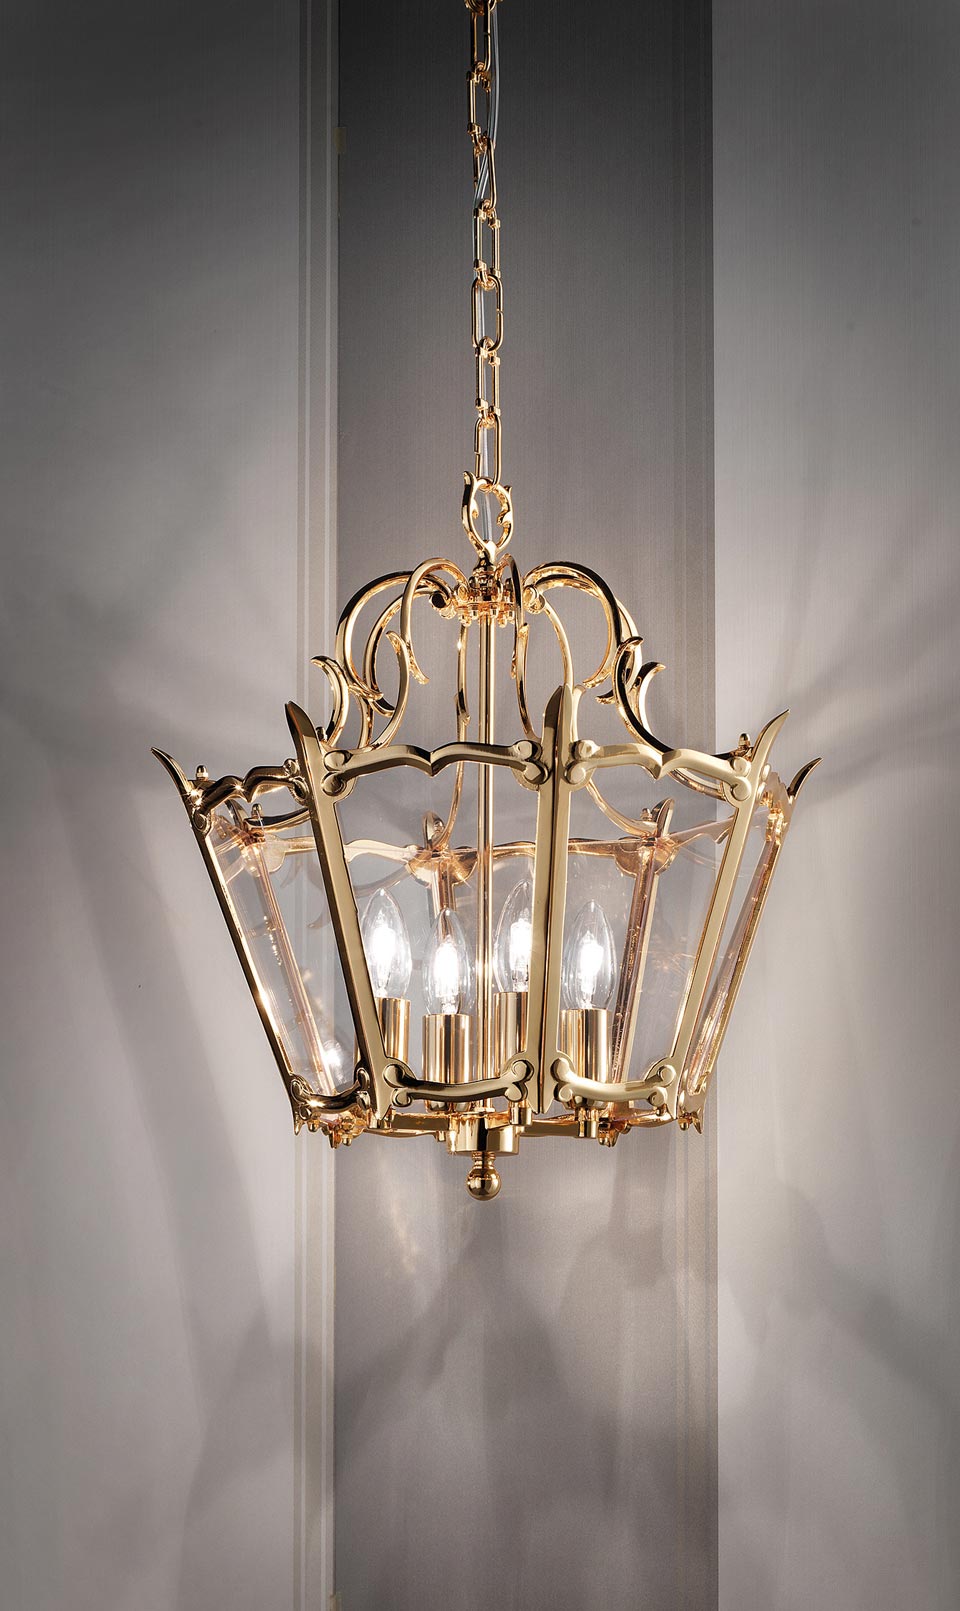 Orientar Oblongo Diverso Hanging lamp golden lantern 4 lights | Masiero | Murano and crystal  chandeliers, lamps and wall lights - Réf. 20020121